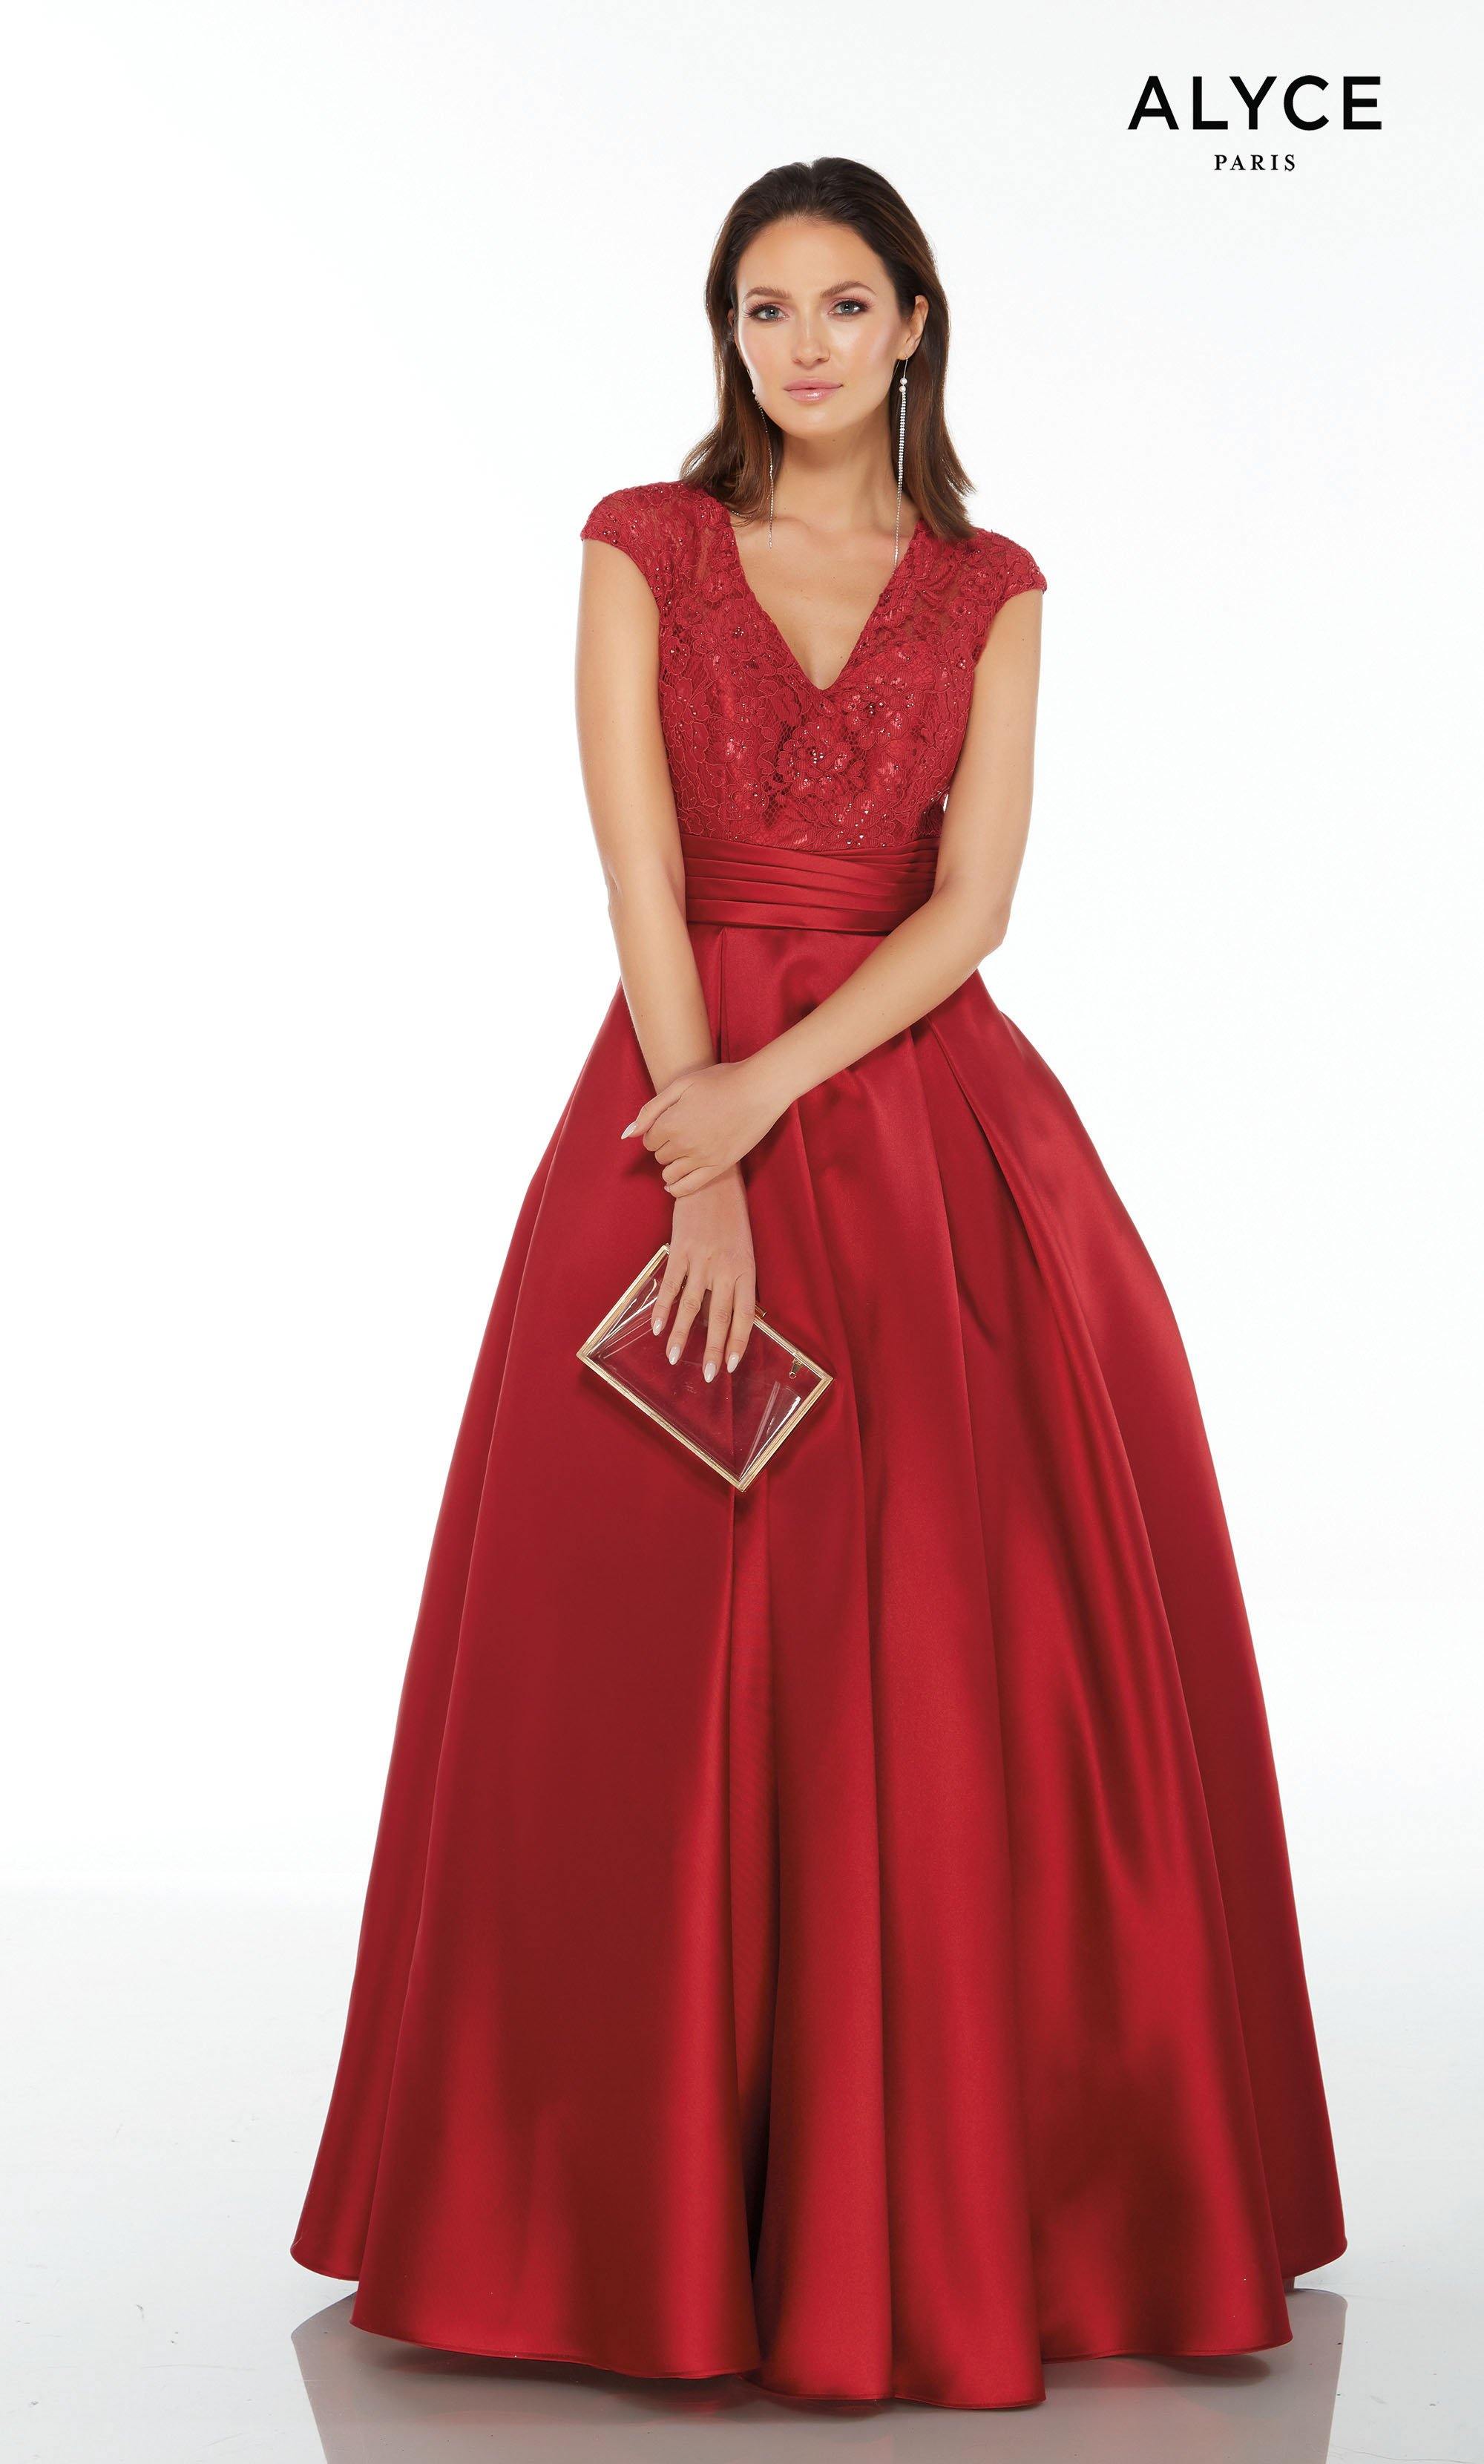 20 DELISH GOWNS UNDER $5000 – Hello May